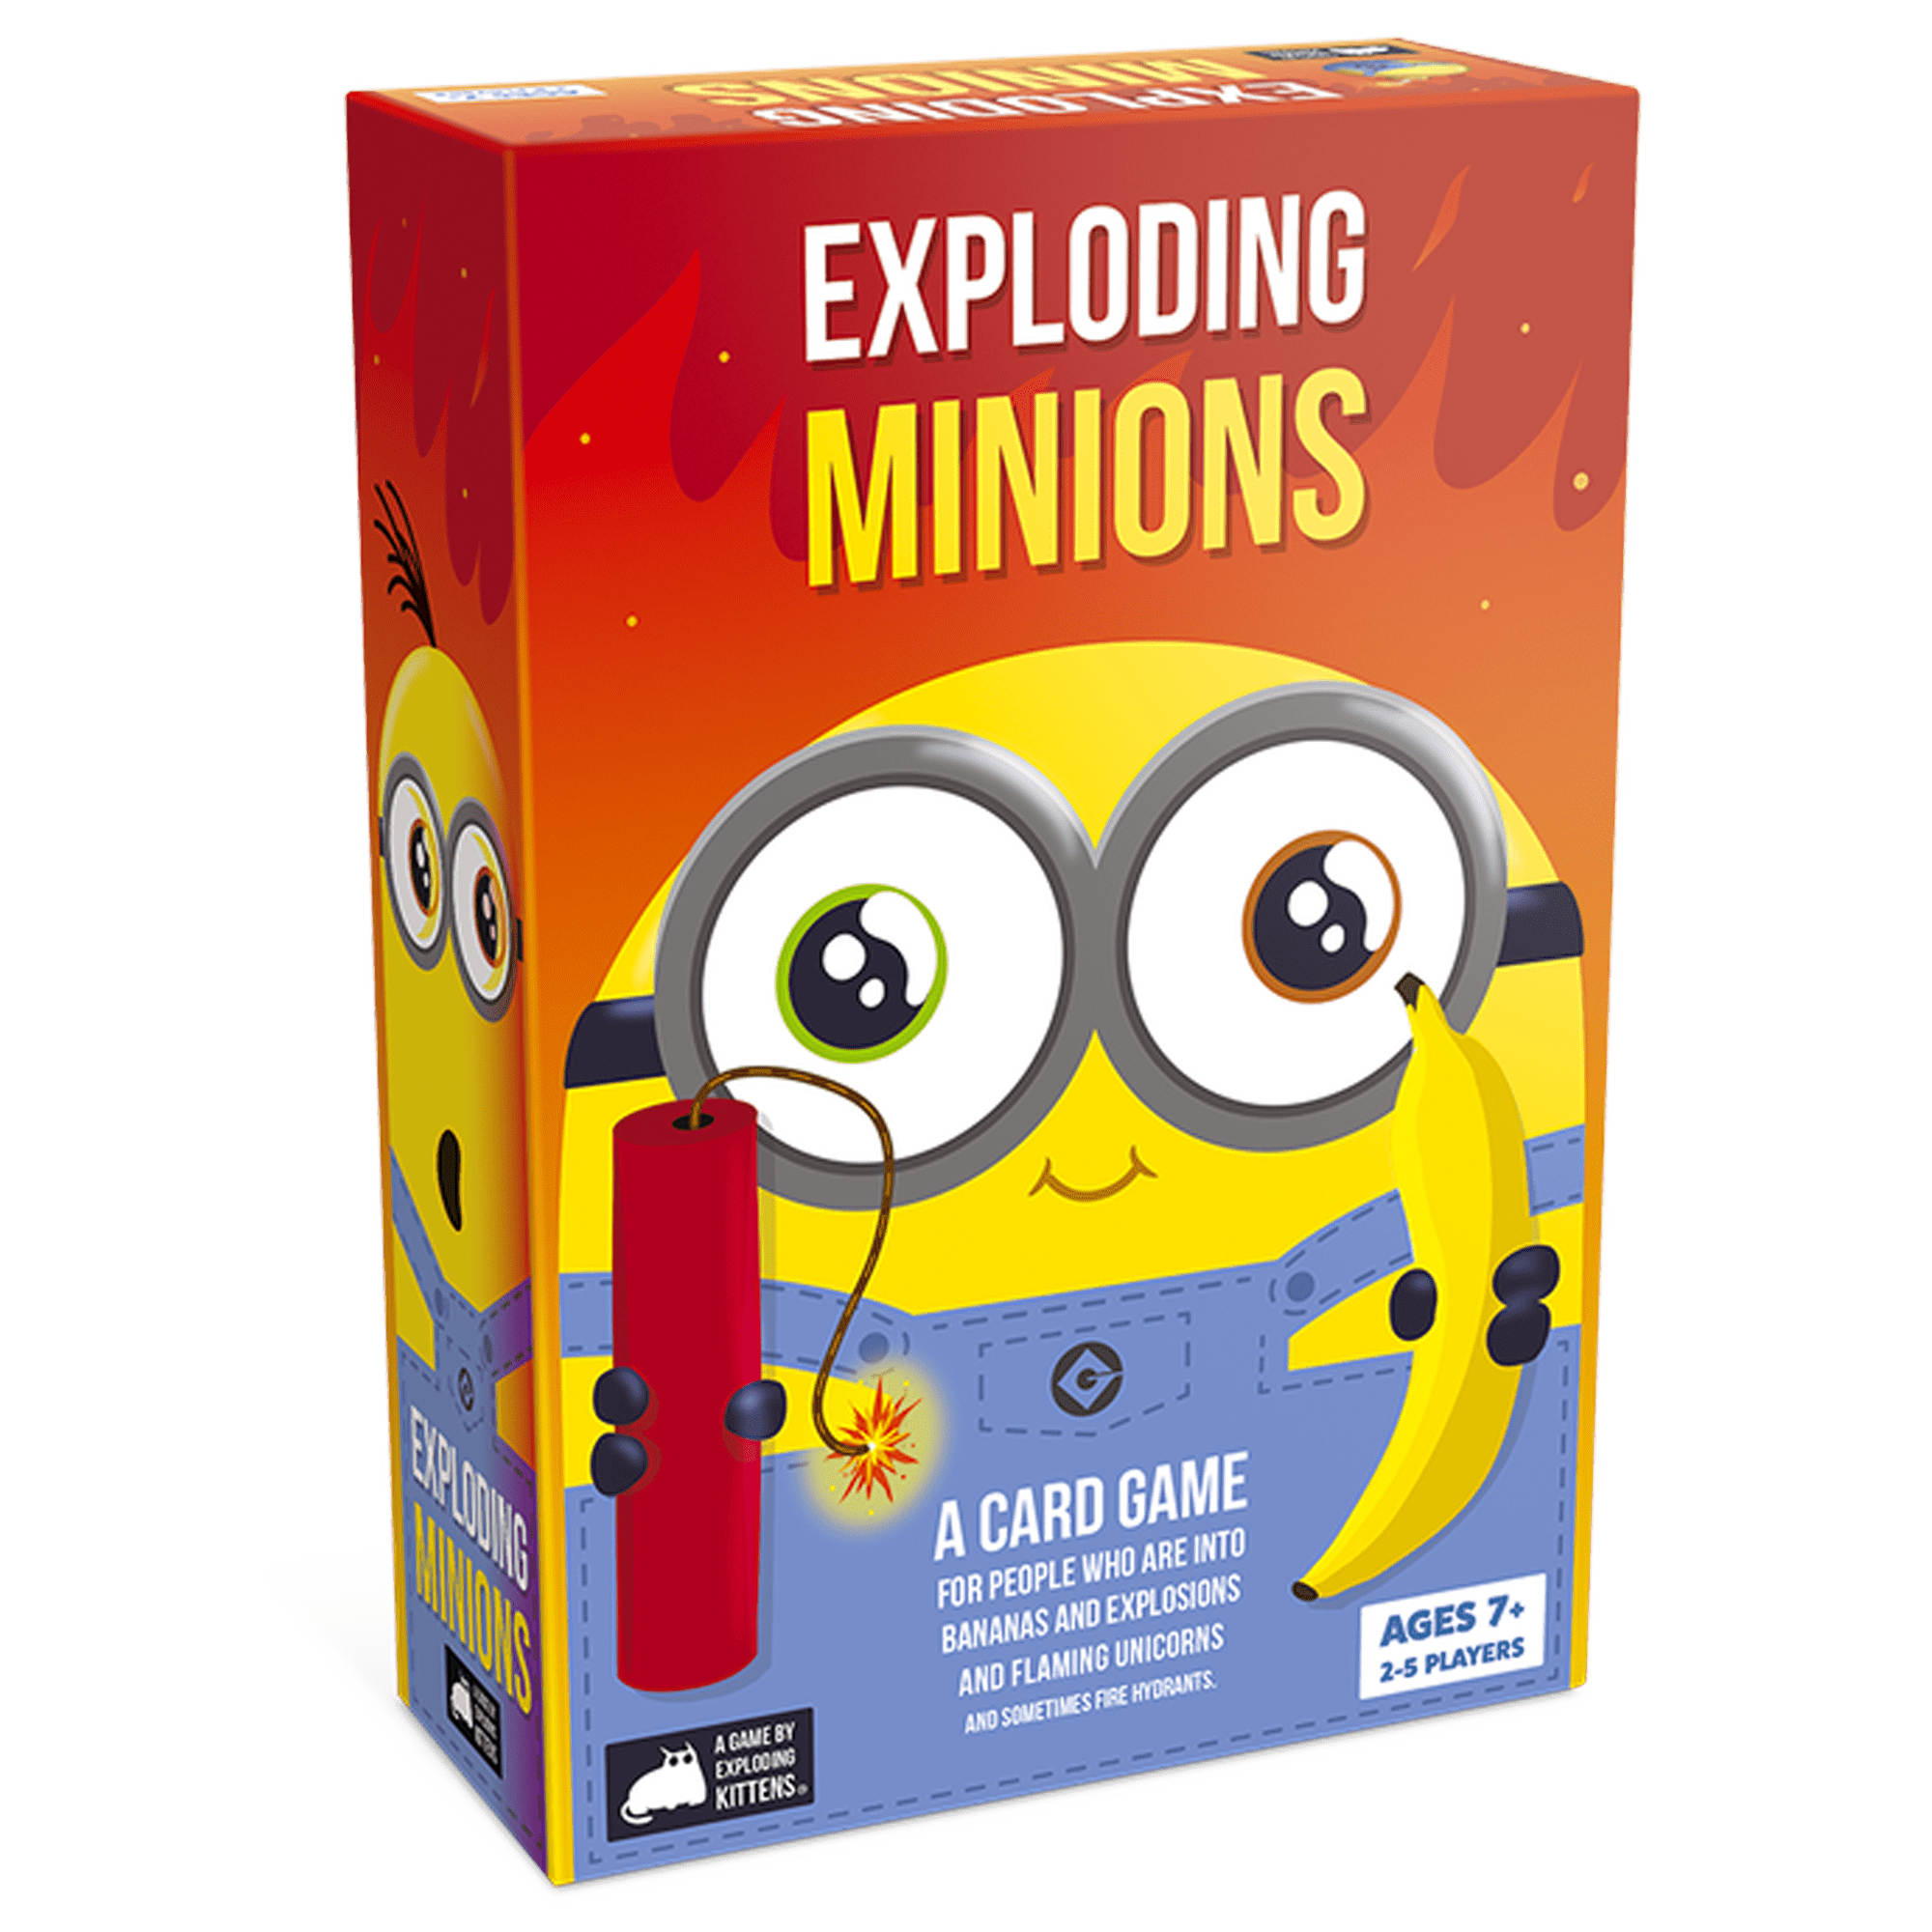 Despicable Me Minion The Game of Life Game Rules & Instructions - Hasbro